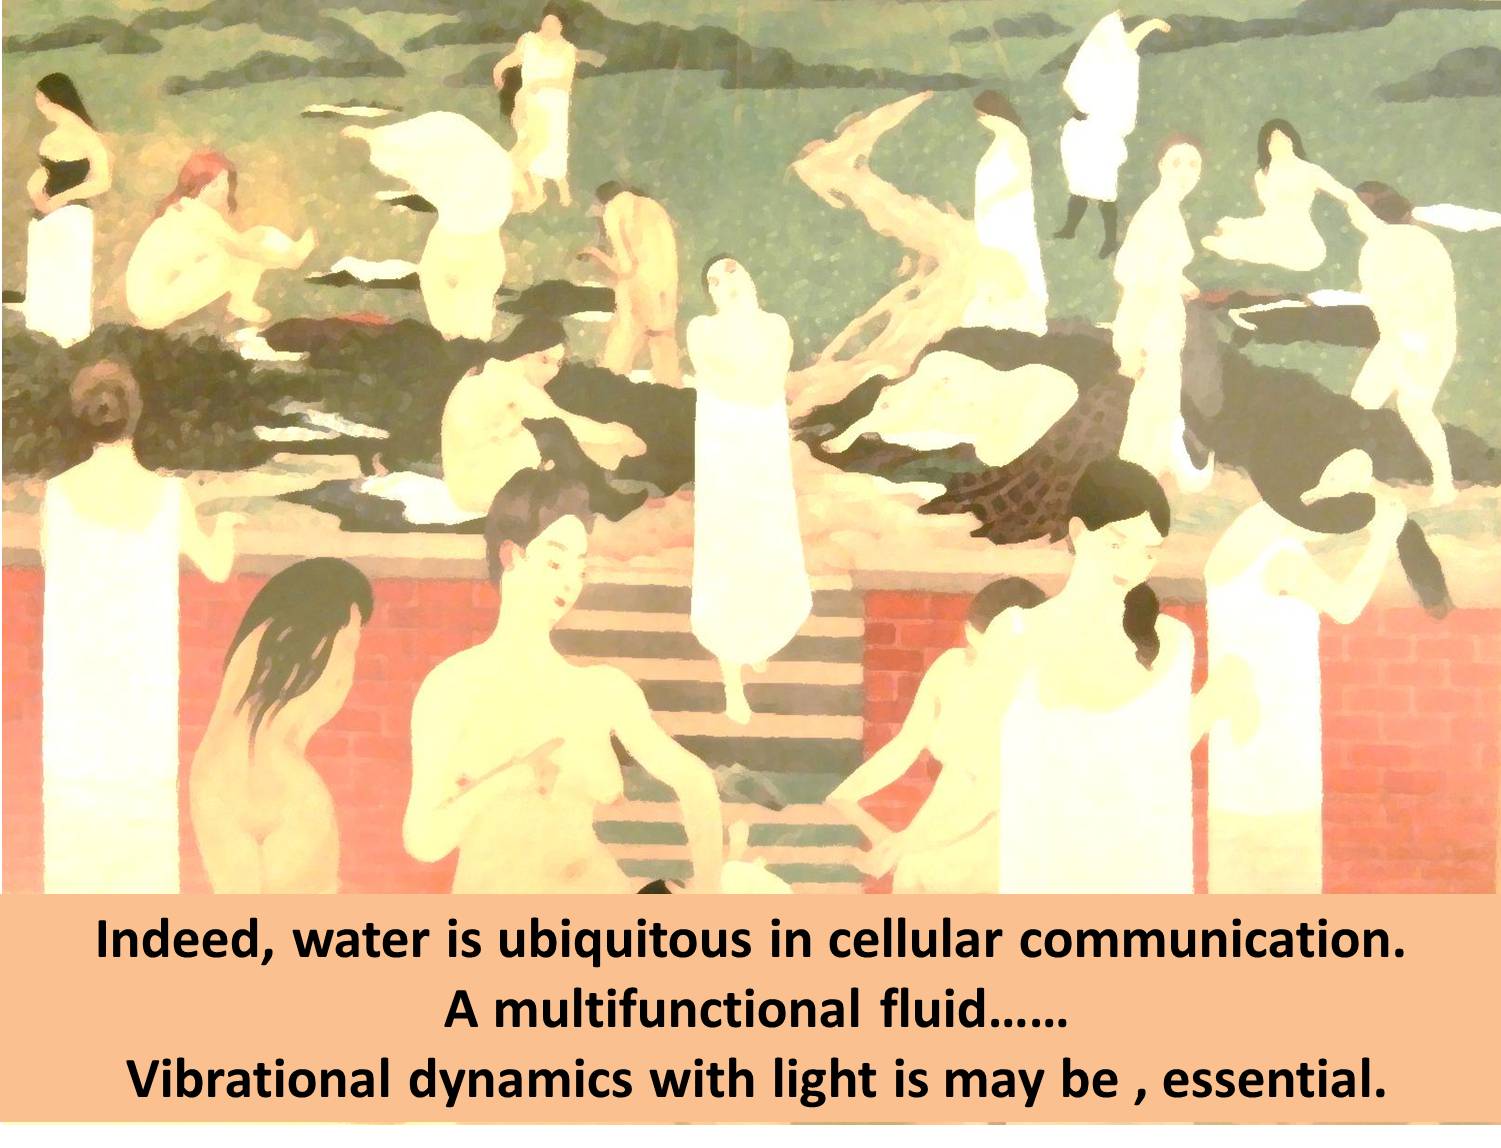 Effects of light on the dynamic potential of water.  WUNSCH  Alexander  MD